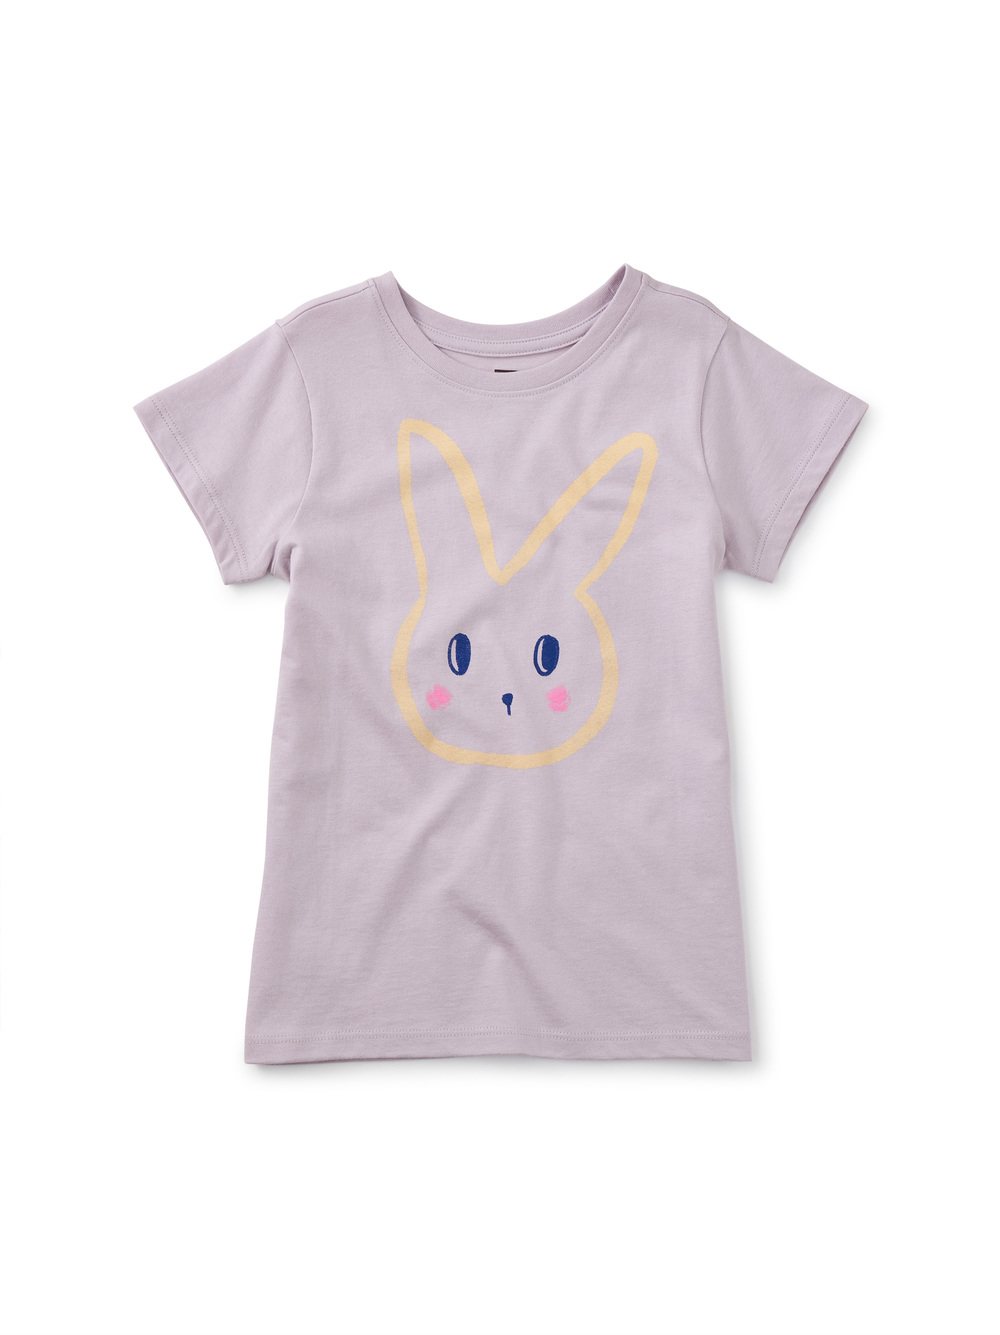 Painted Bunny Graphic Tee